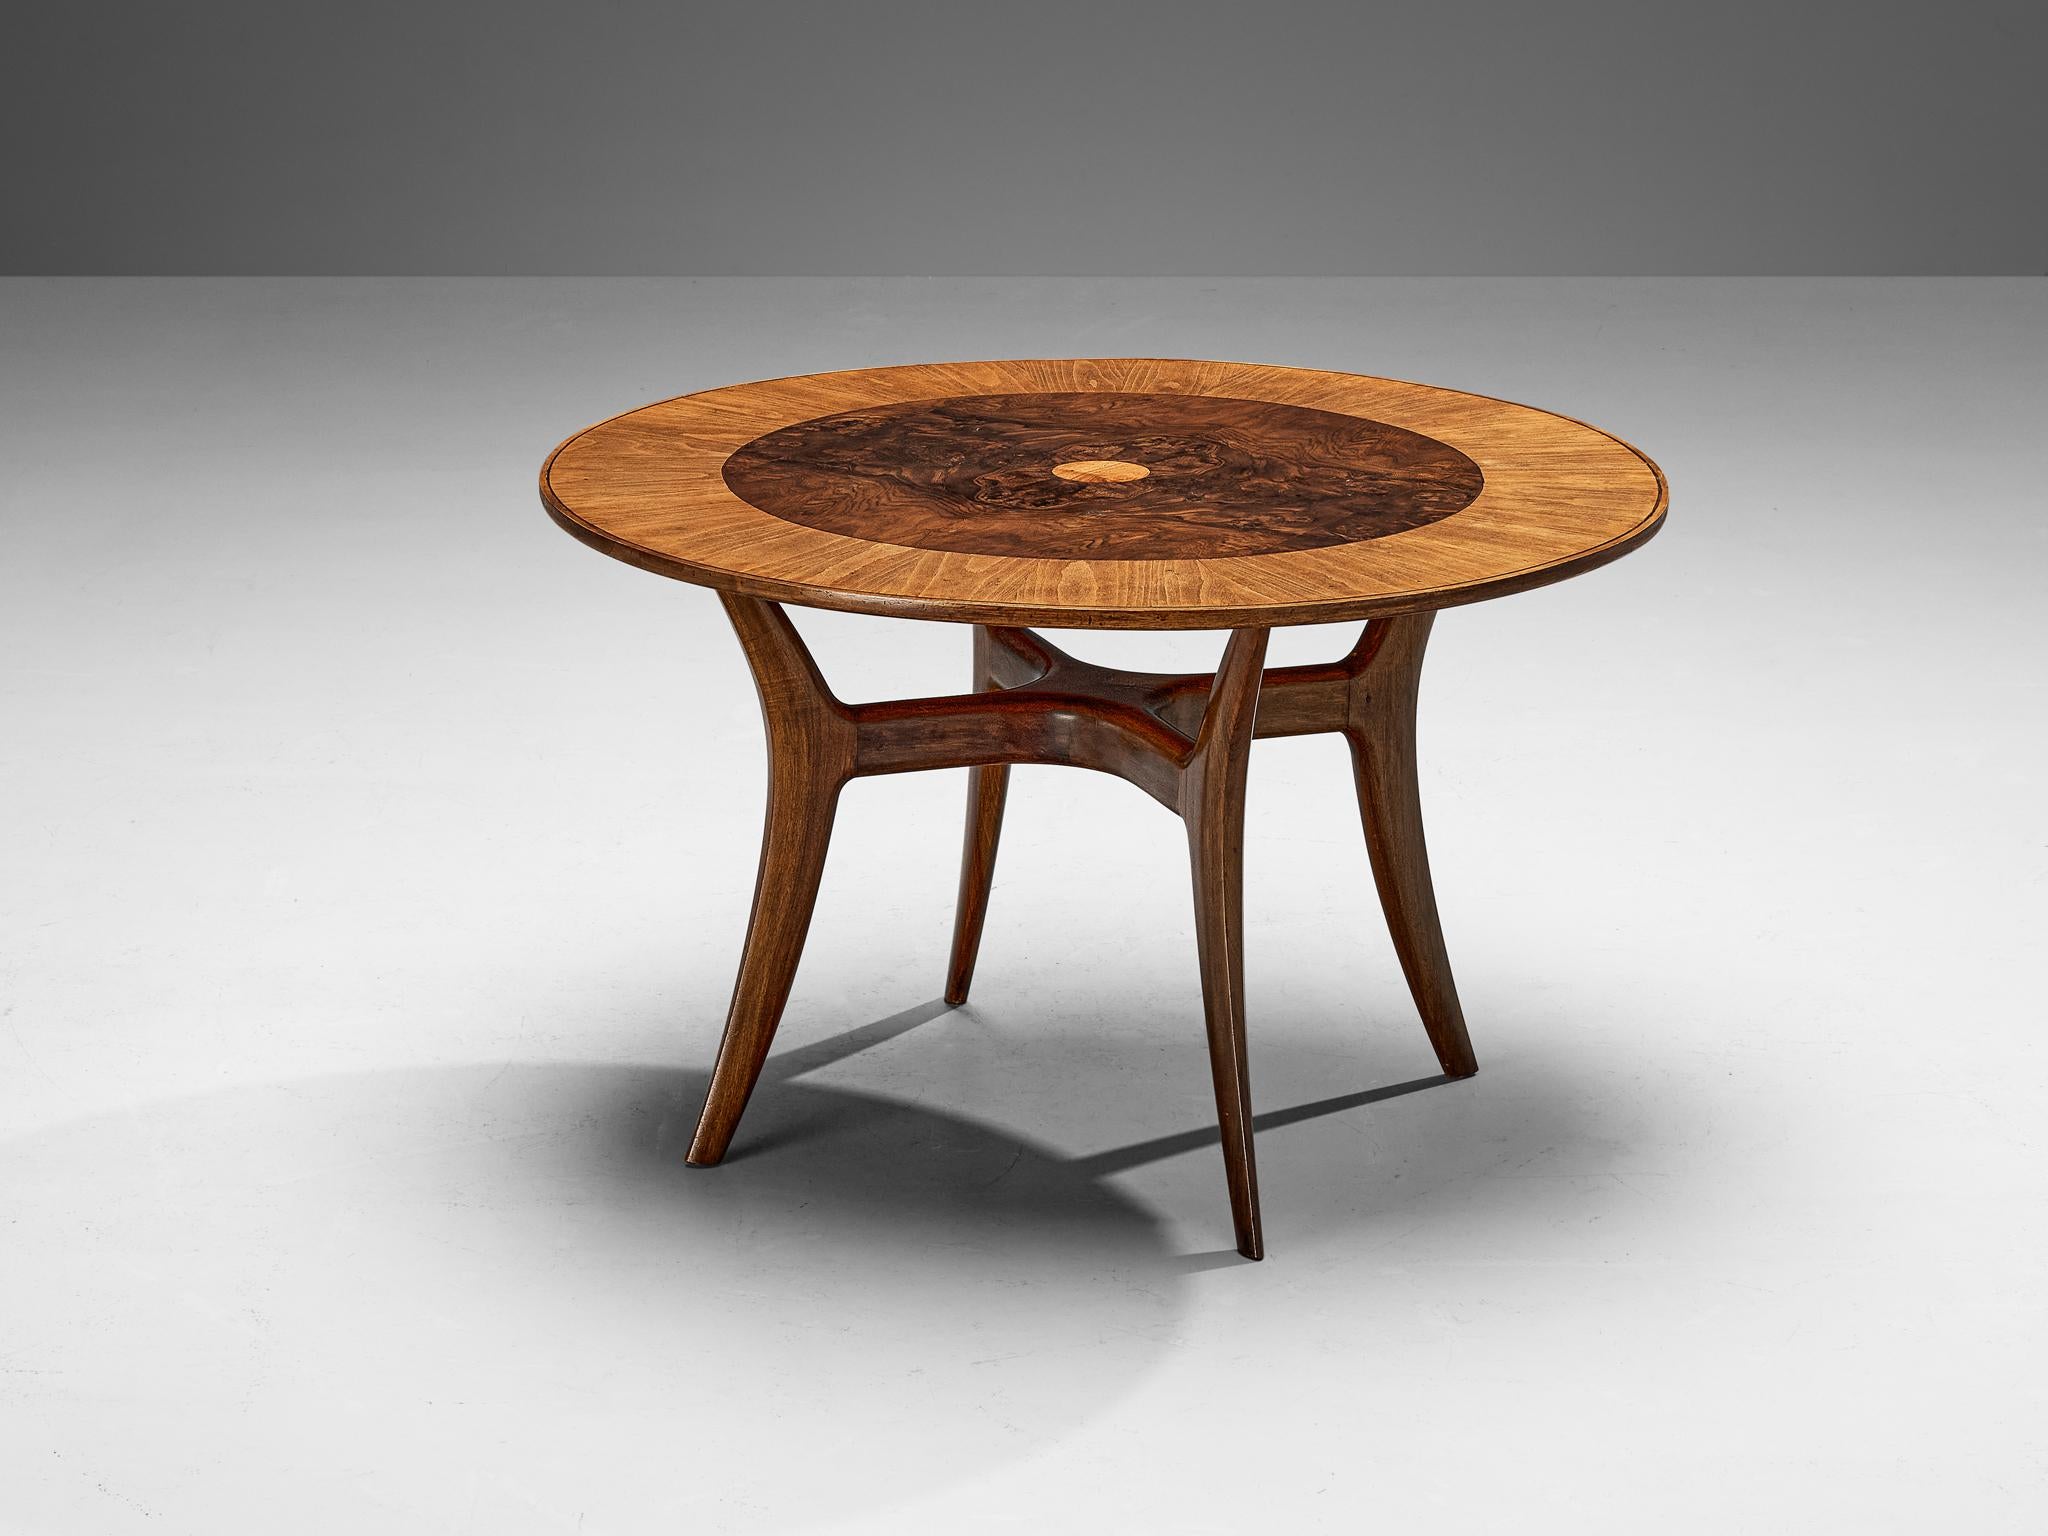 Elegant Italian Round Dining or Center Table in Briar and Walnut